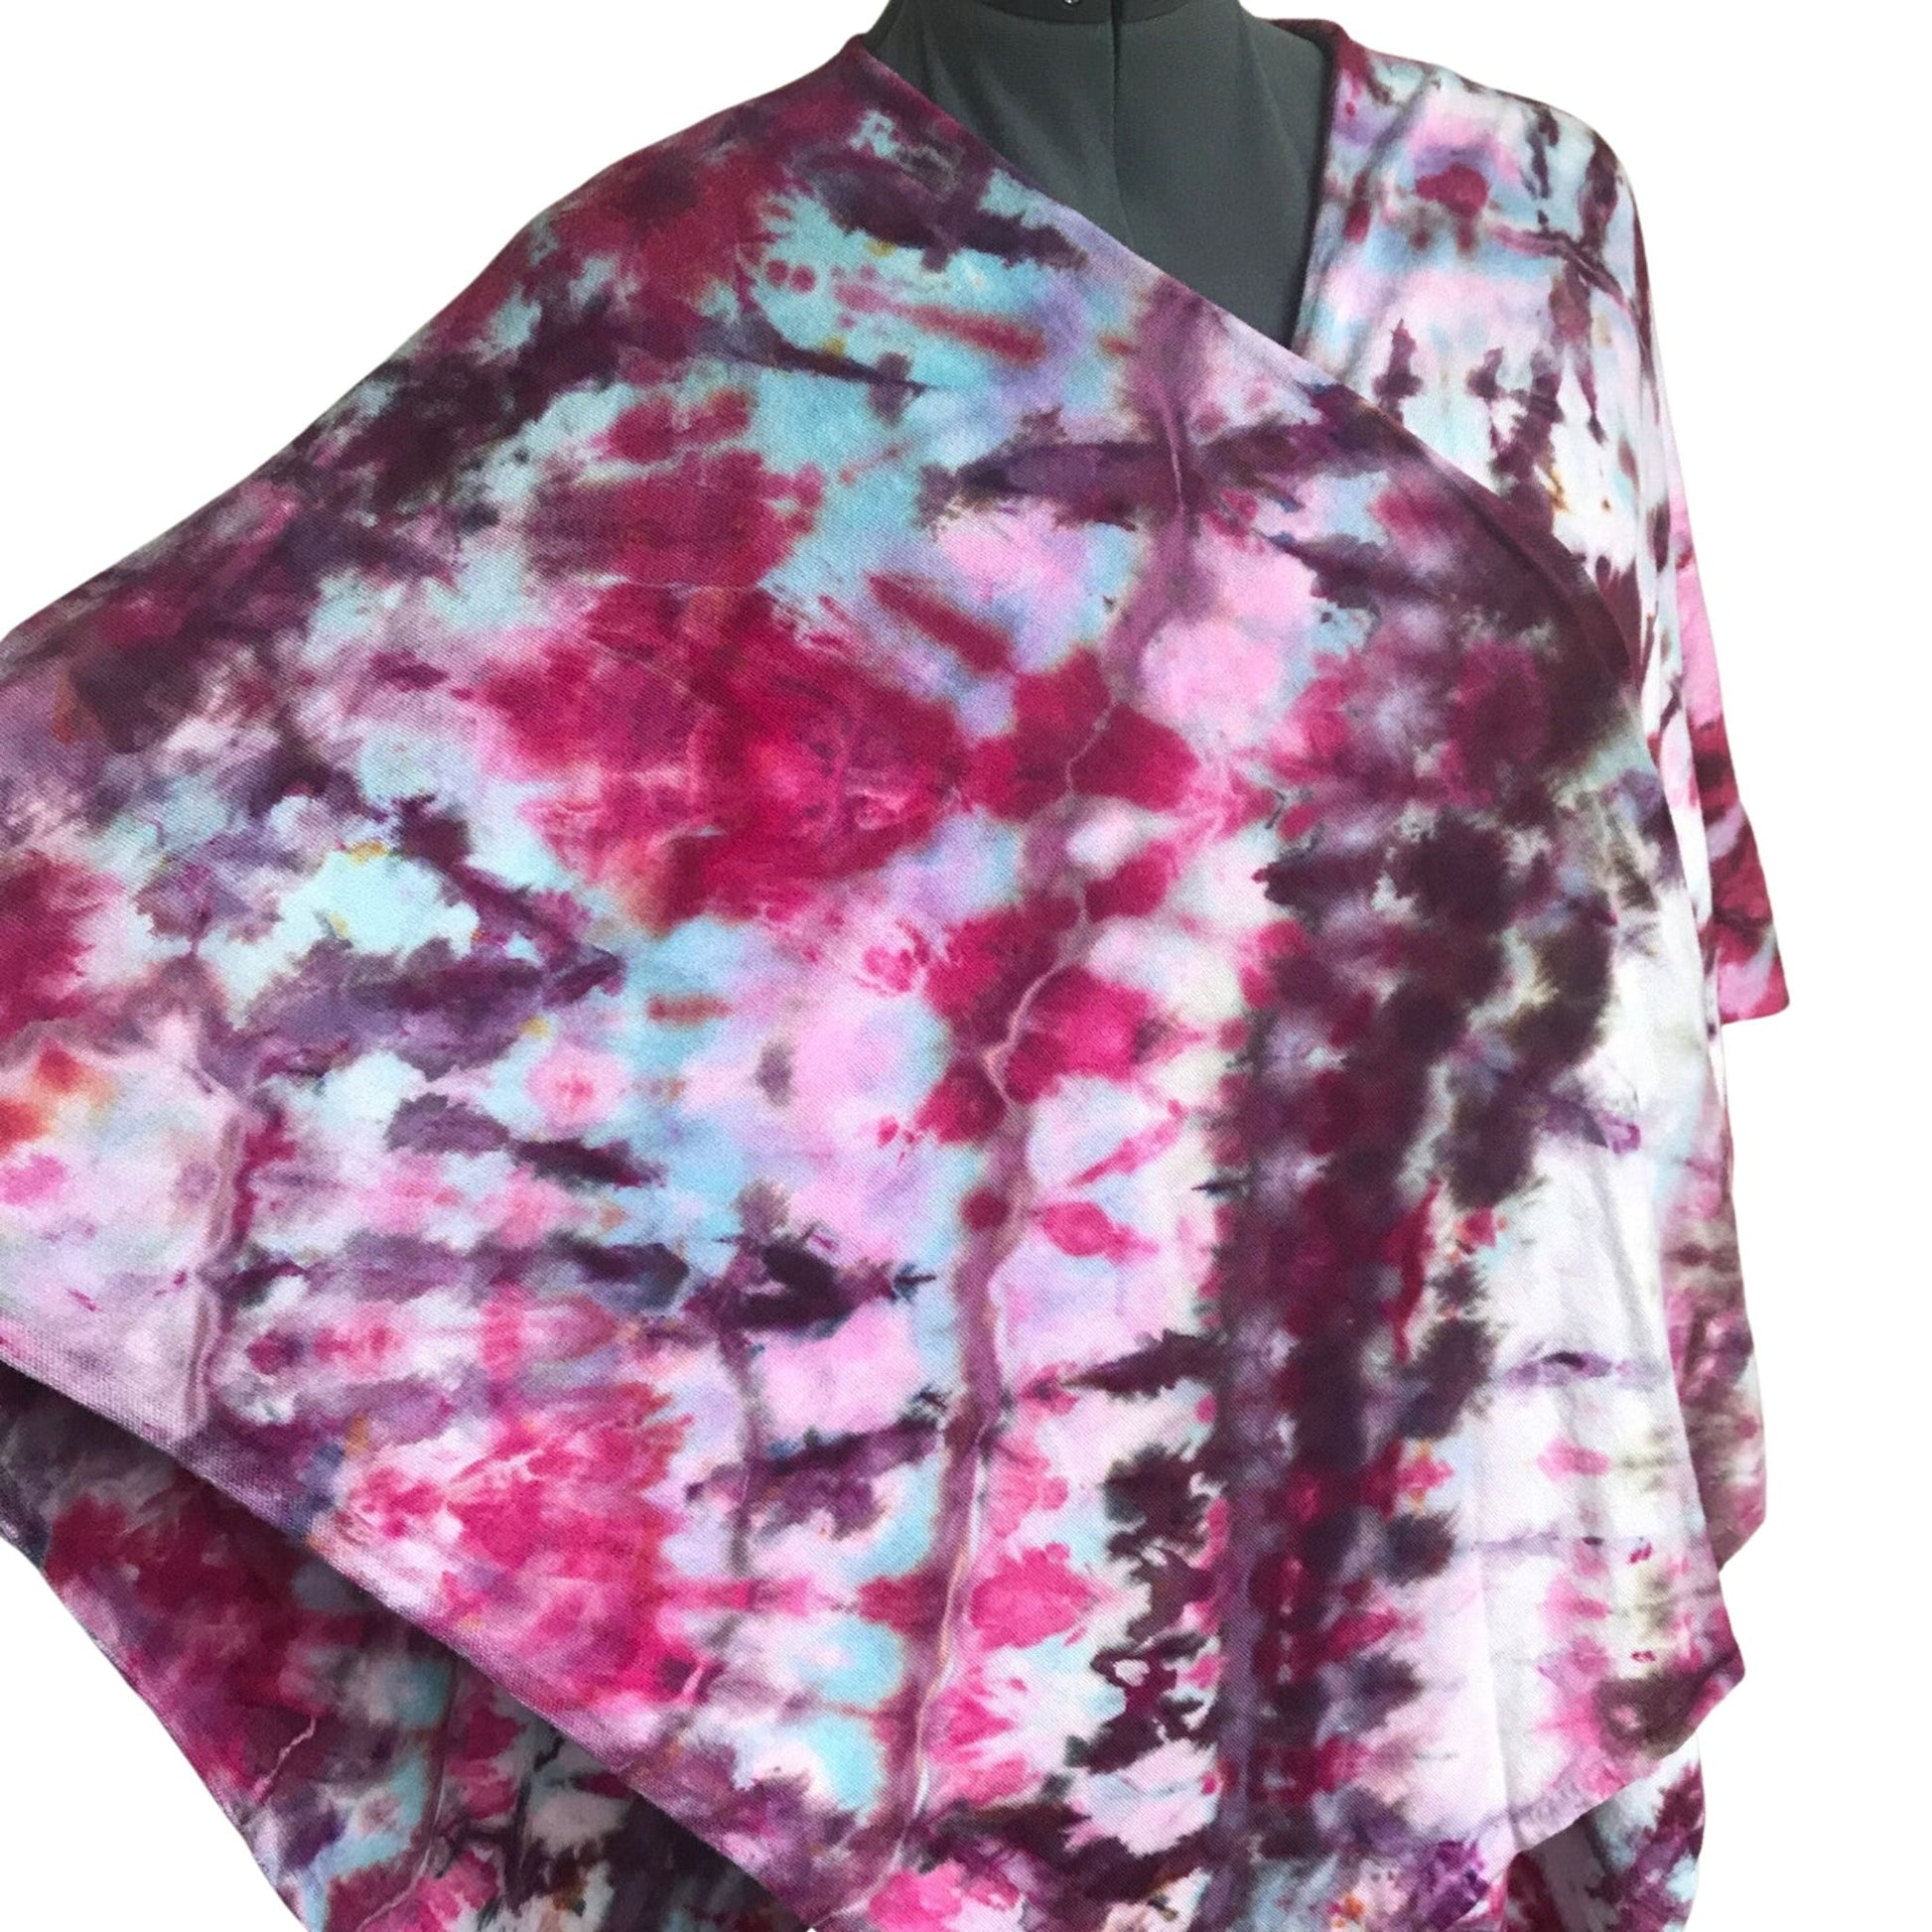 Front View of a Tie Dye Shawl wrapped around a dressform. One side is extended out as if over an arm. The colors are turuoise and magenta in abstract irregular lines